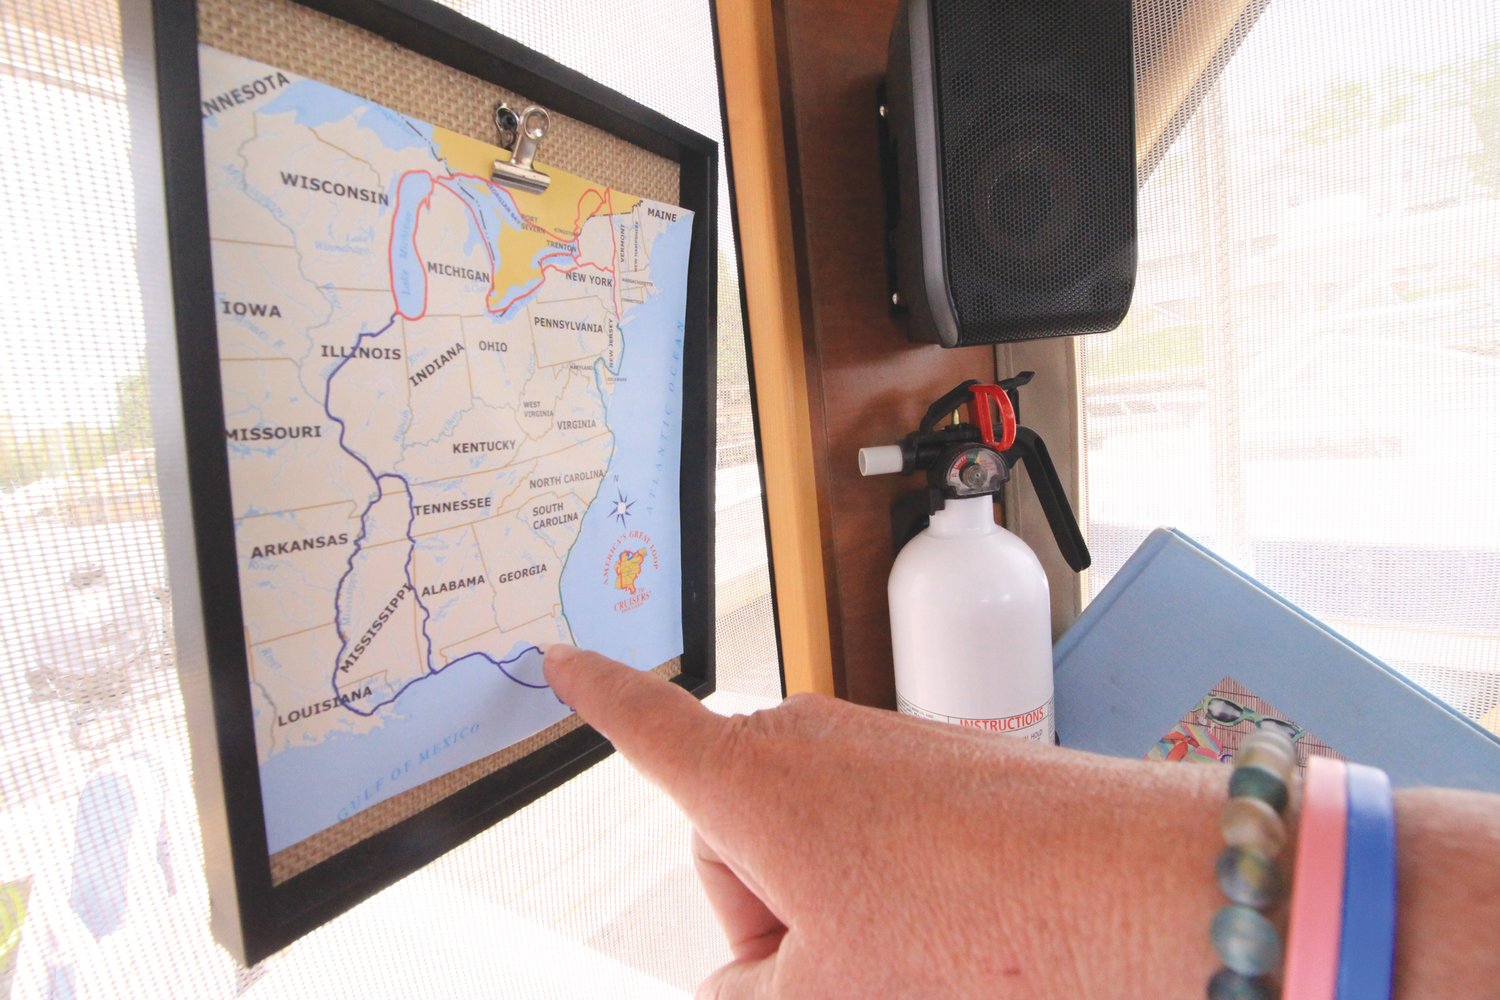 THAT’S THE PLAN: A framed map serves as a reminder of the 6,000-mile loop Rick and Marie plan to complete in their 28-foot “pocket yacht.”